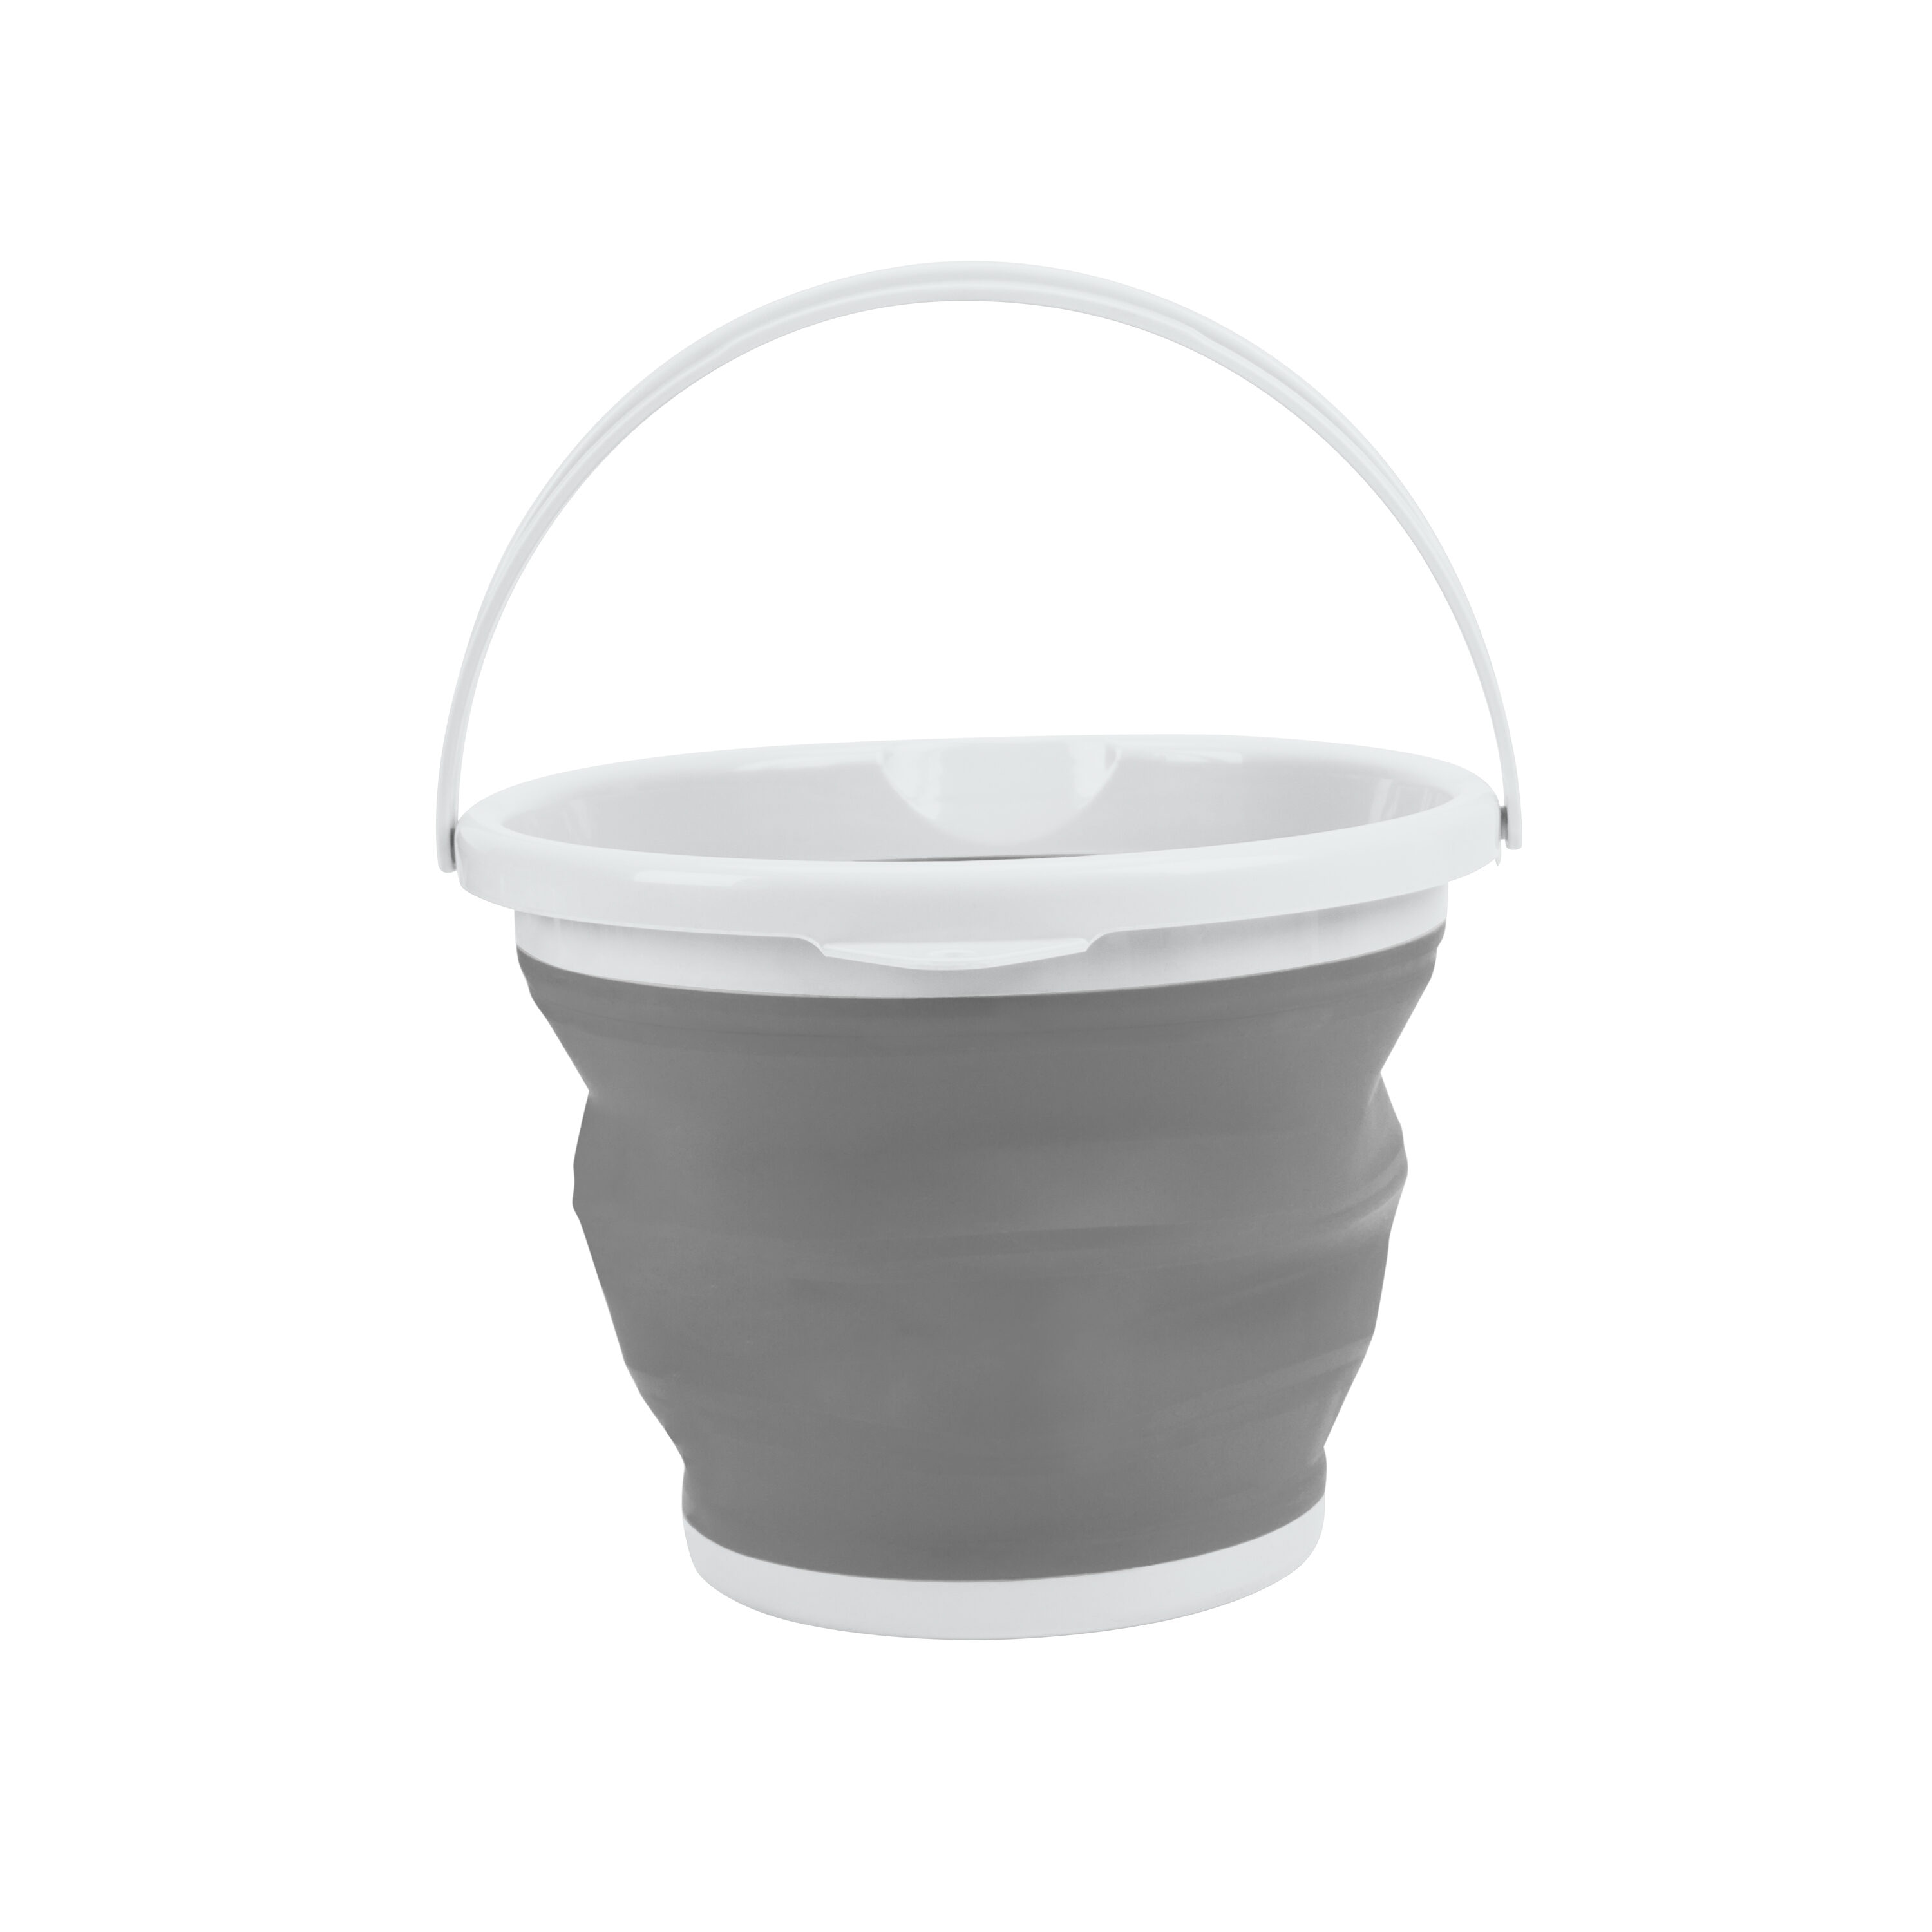 Simplify 10L Collapsible Bucket